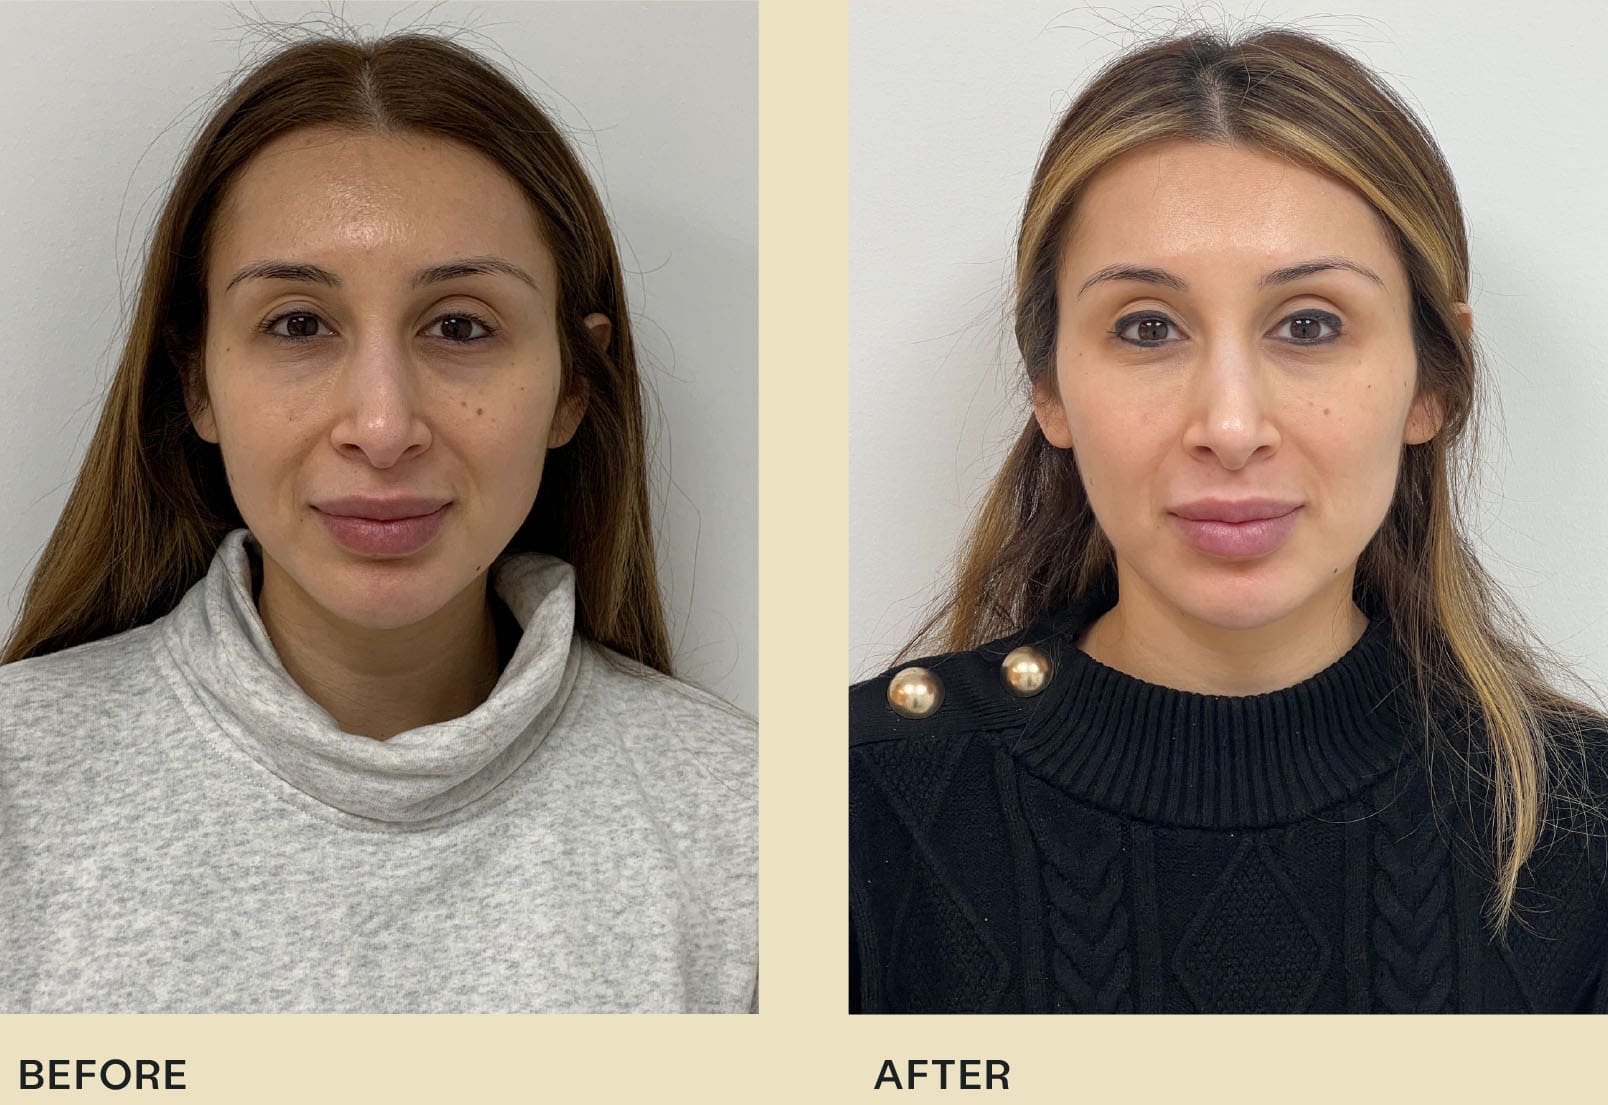 ADVANCED SKIN REJUVENATION WITH THESE NEW LASER RESURFACING TREATMENTS